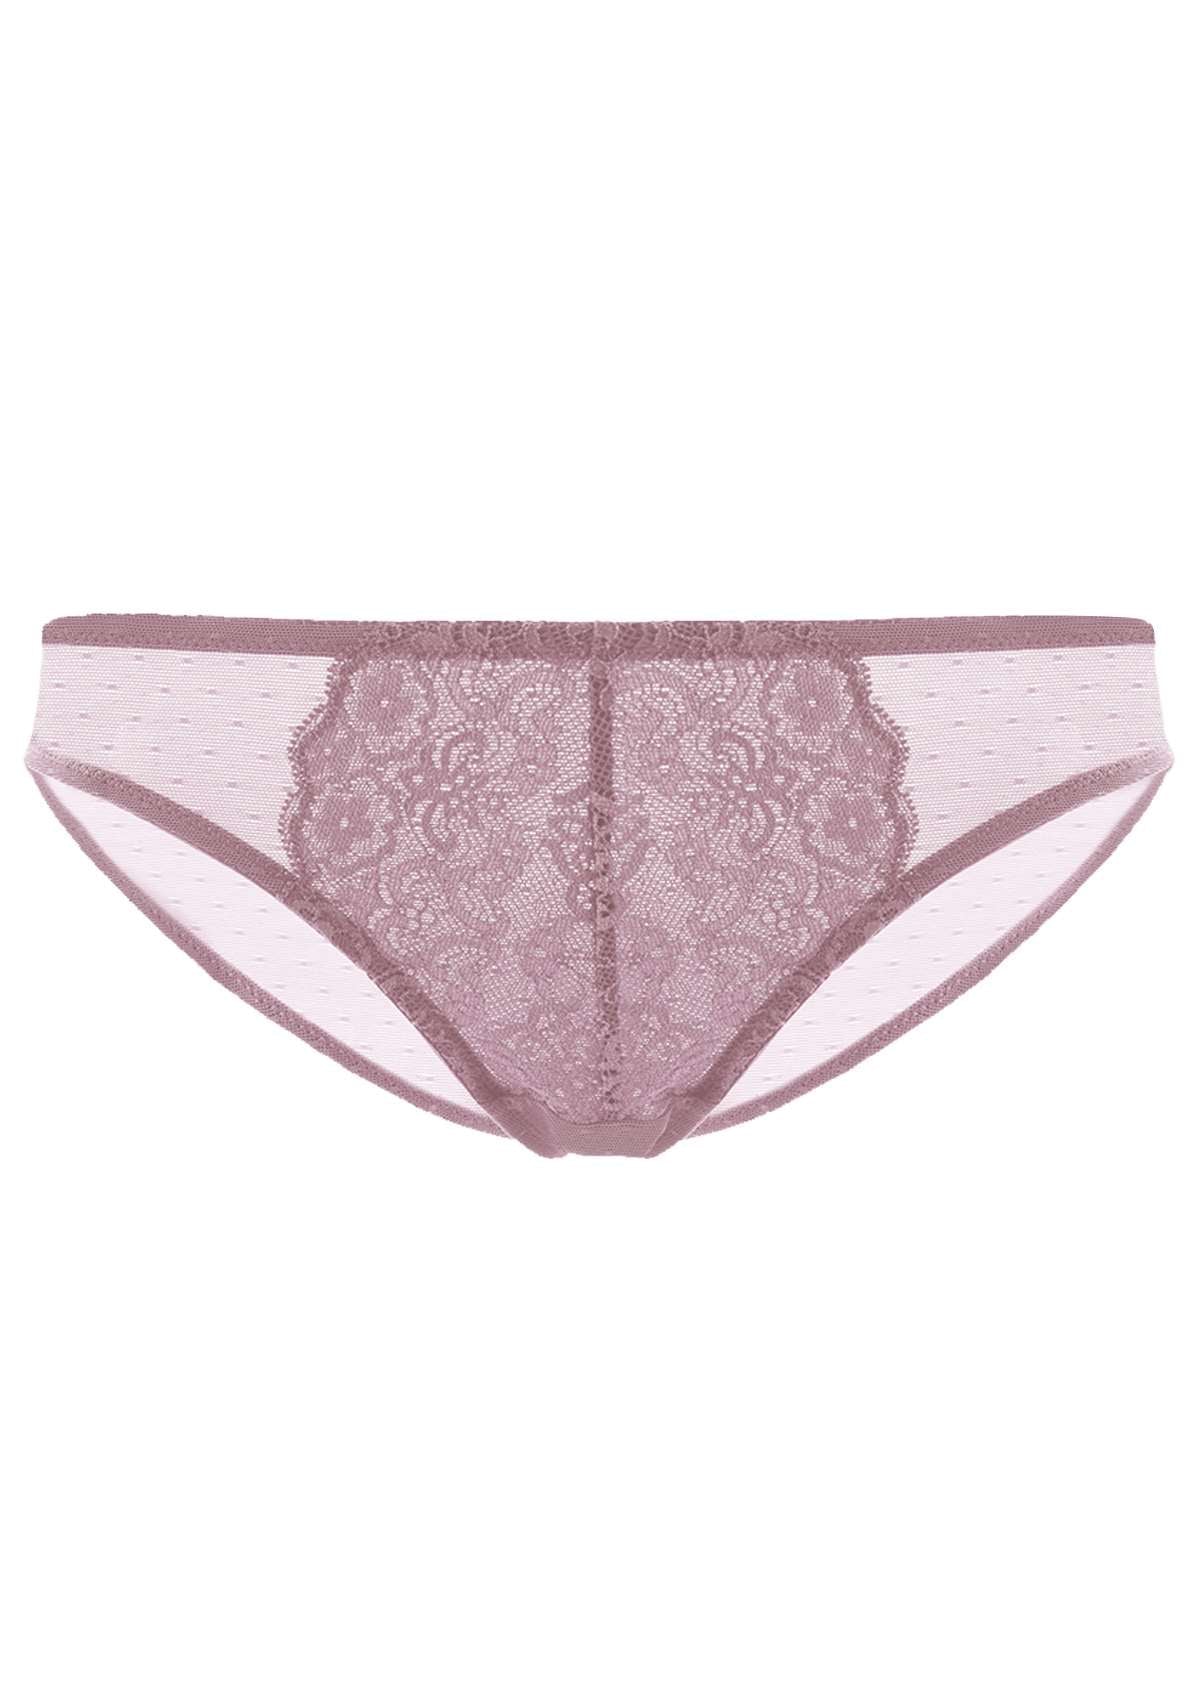 HSIA Nymphaea Front Floral Lace Mesh Back Comfort Bikini Underwear - XL / Pink